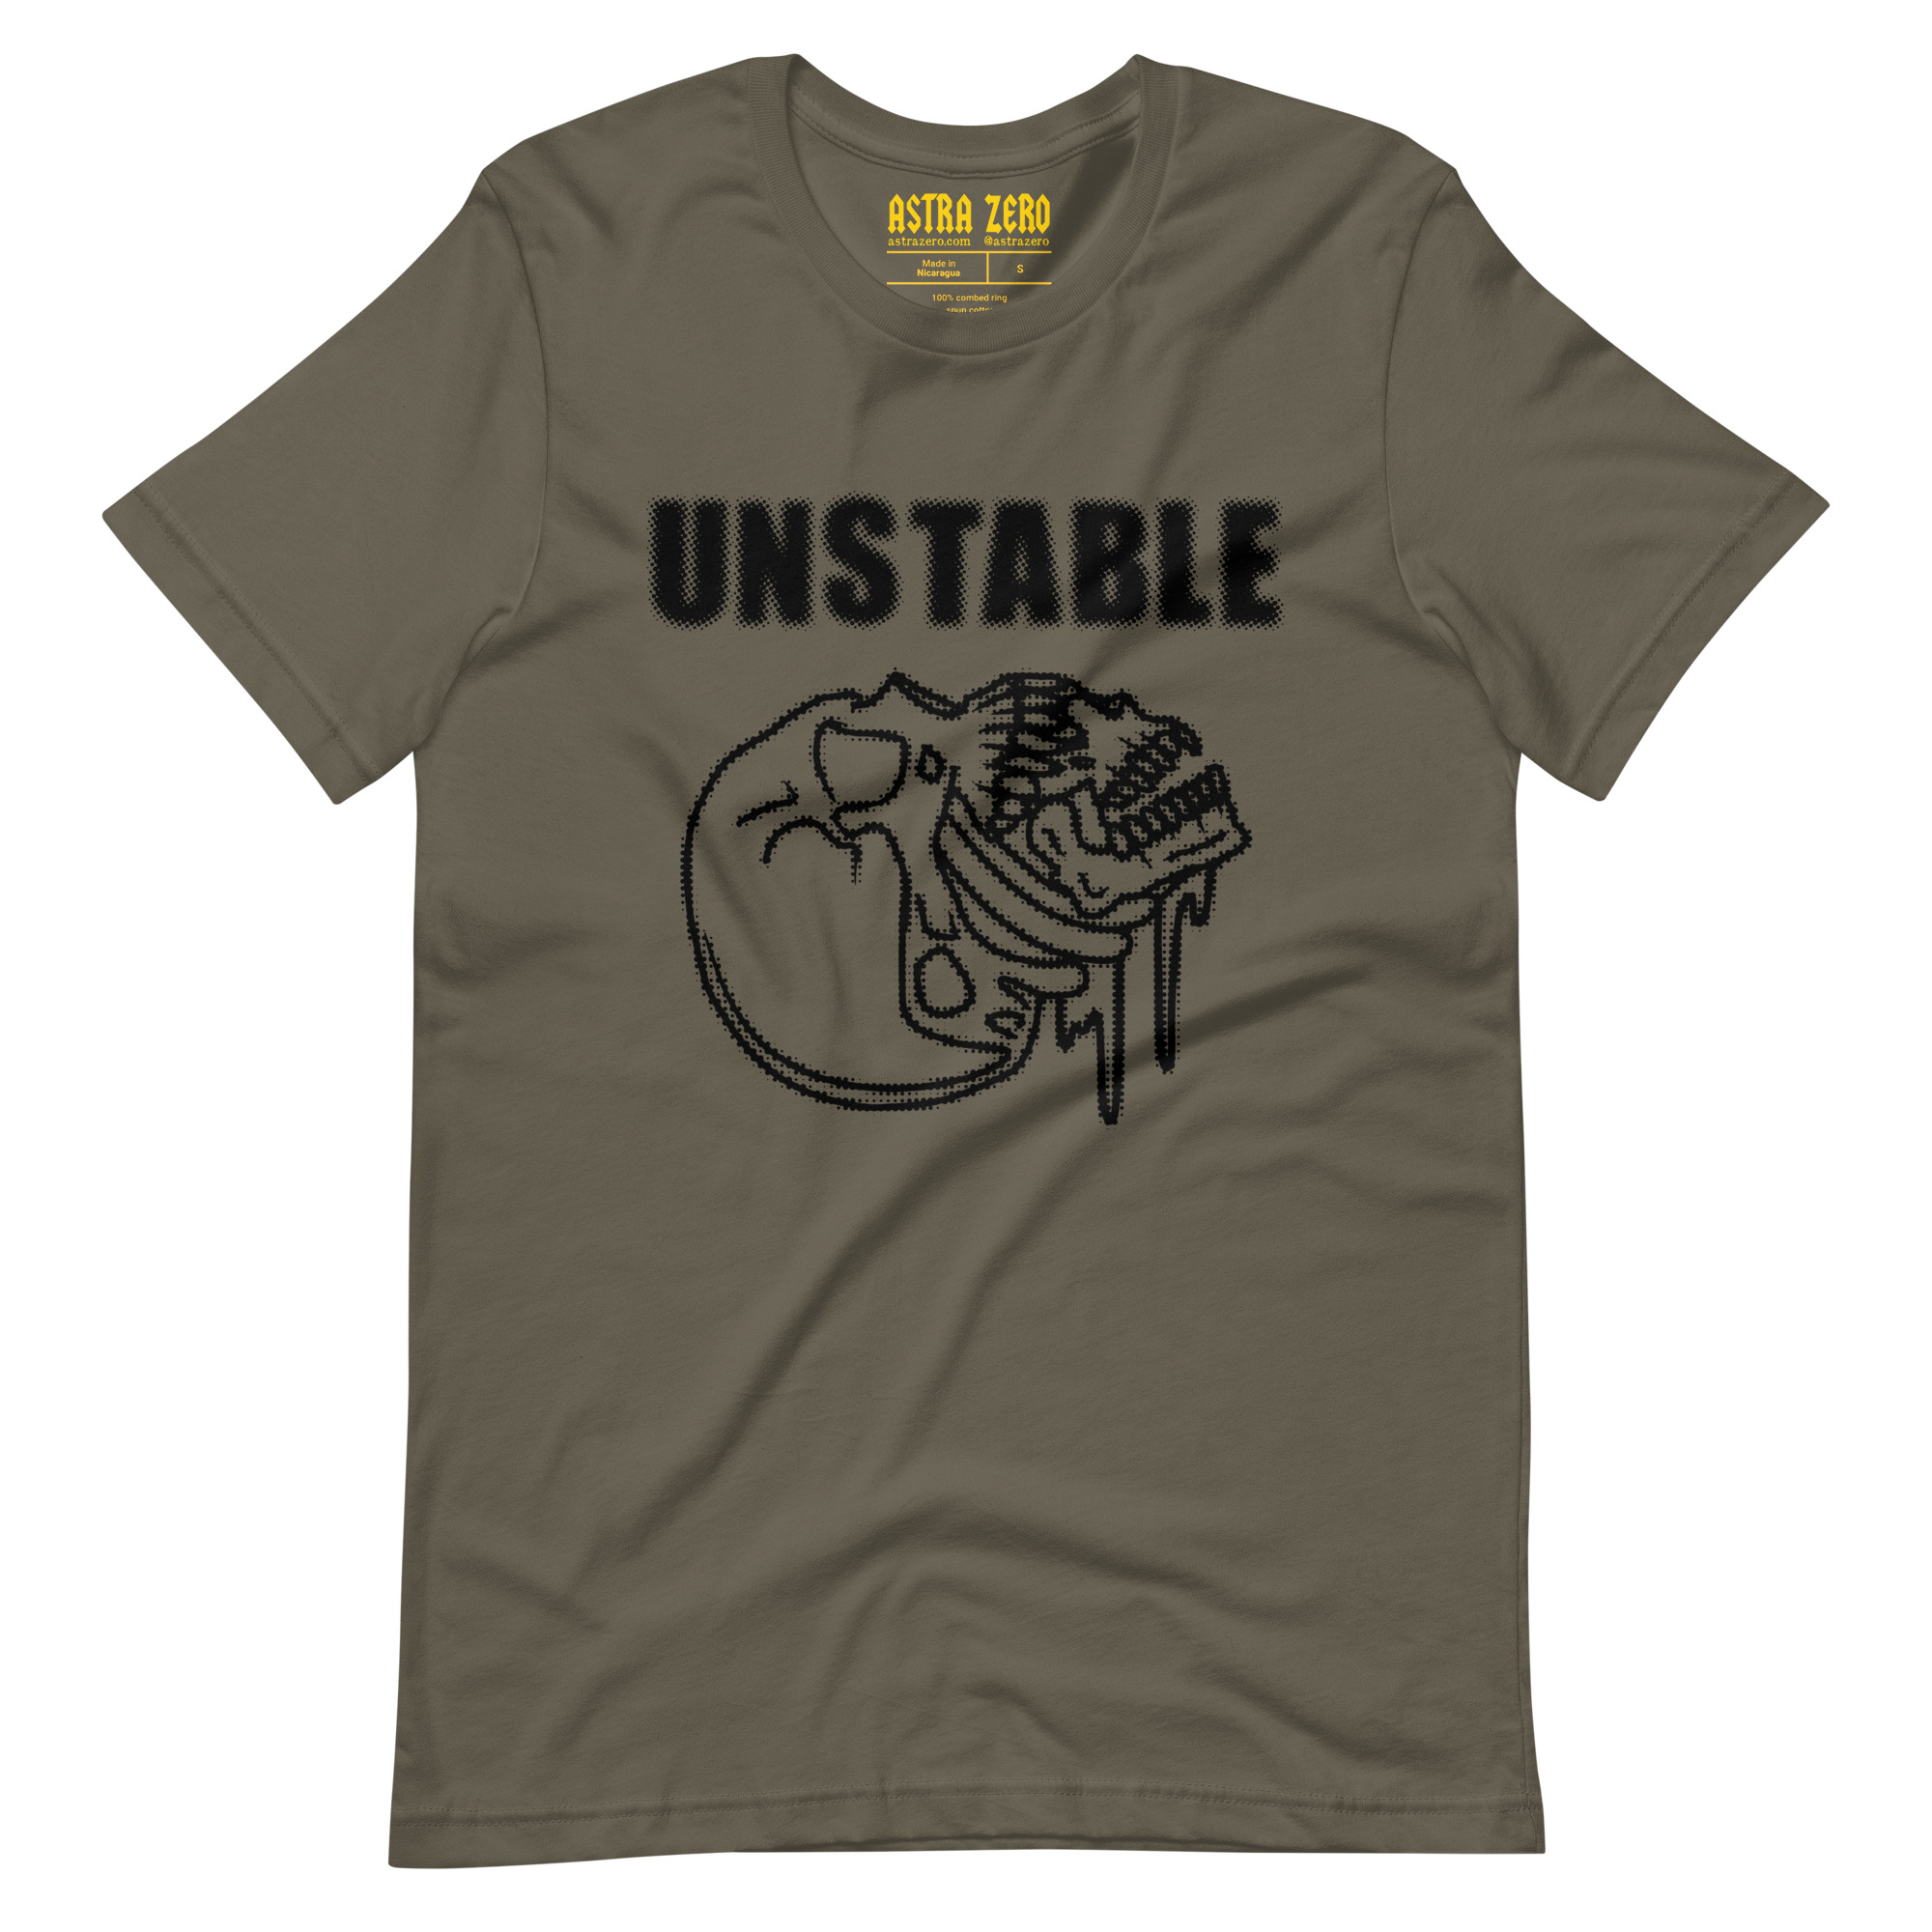 Featured image for “Unstable - Unisex t-shirt”